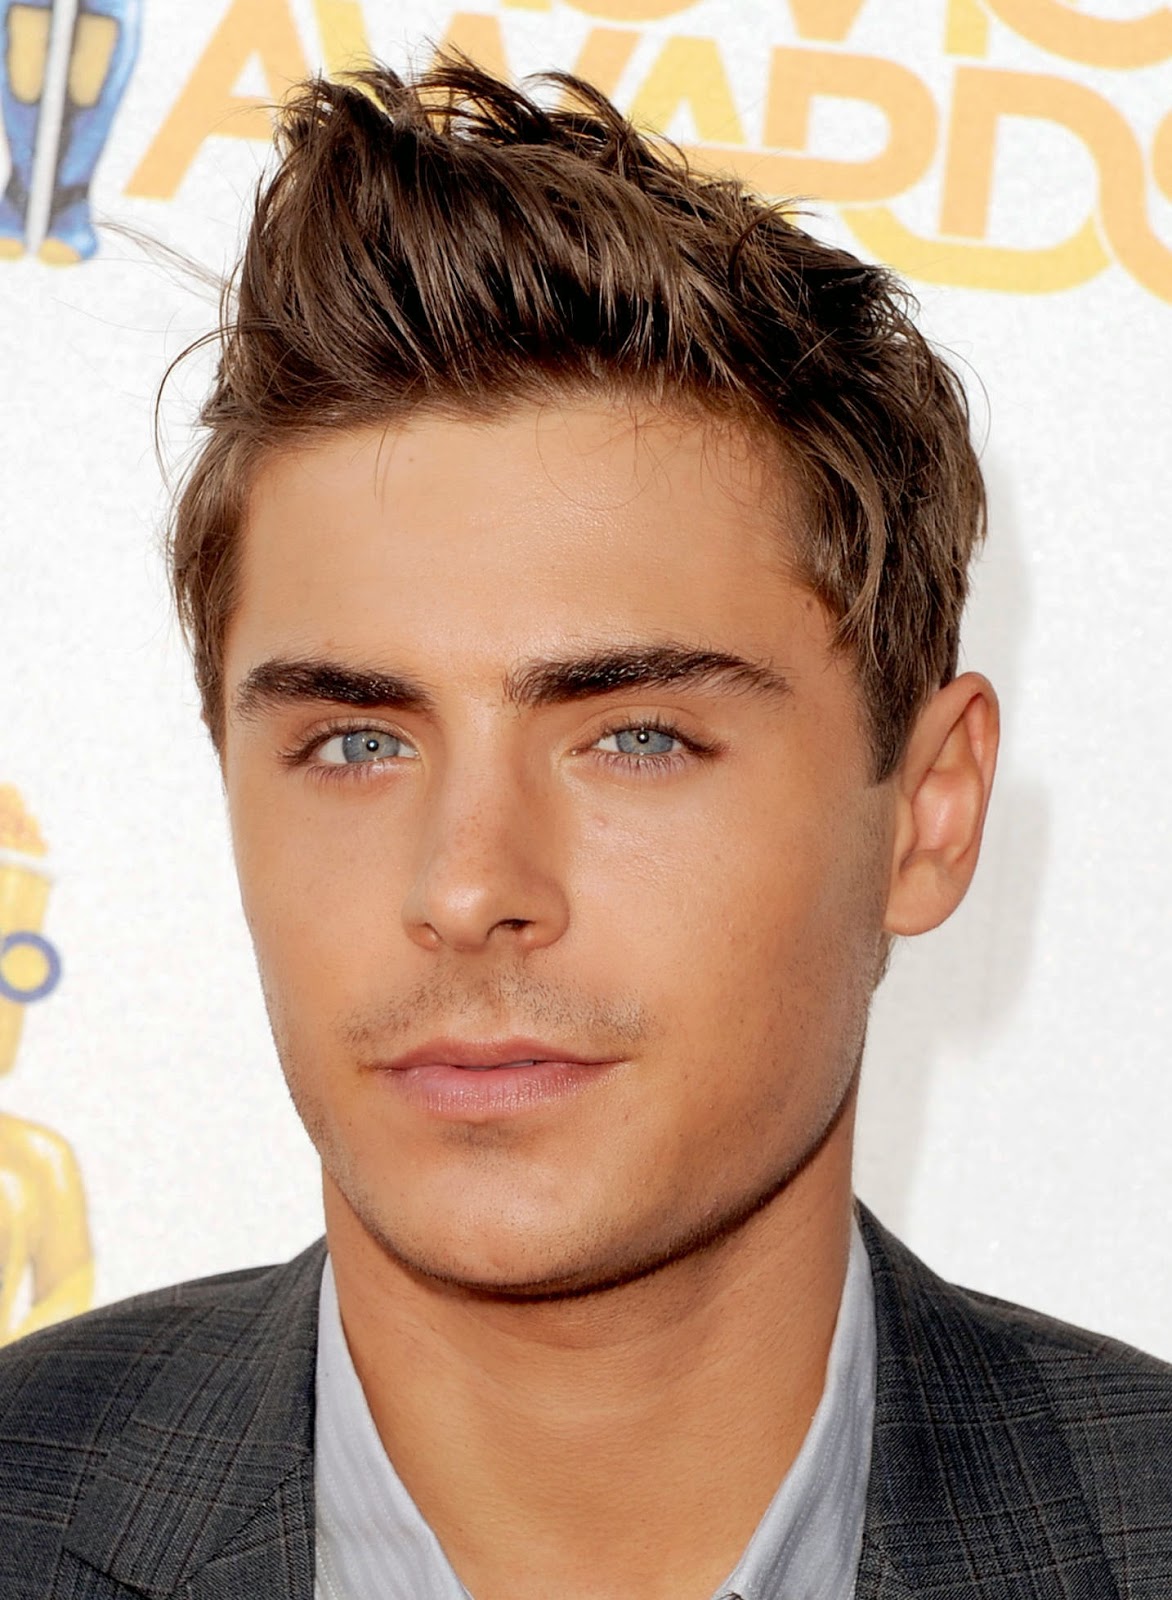 Zac Efron hairstyle picturephotos and Wallpaper